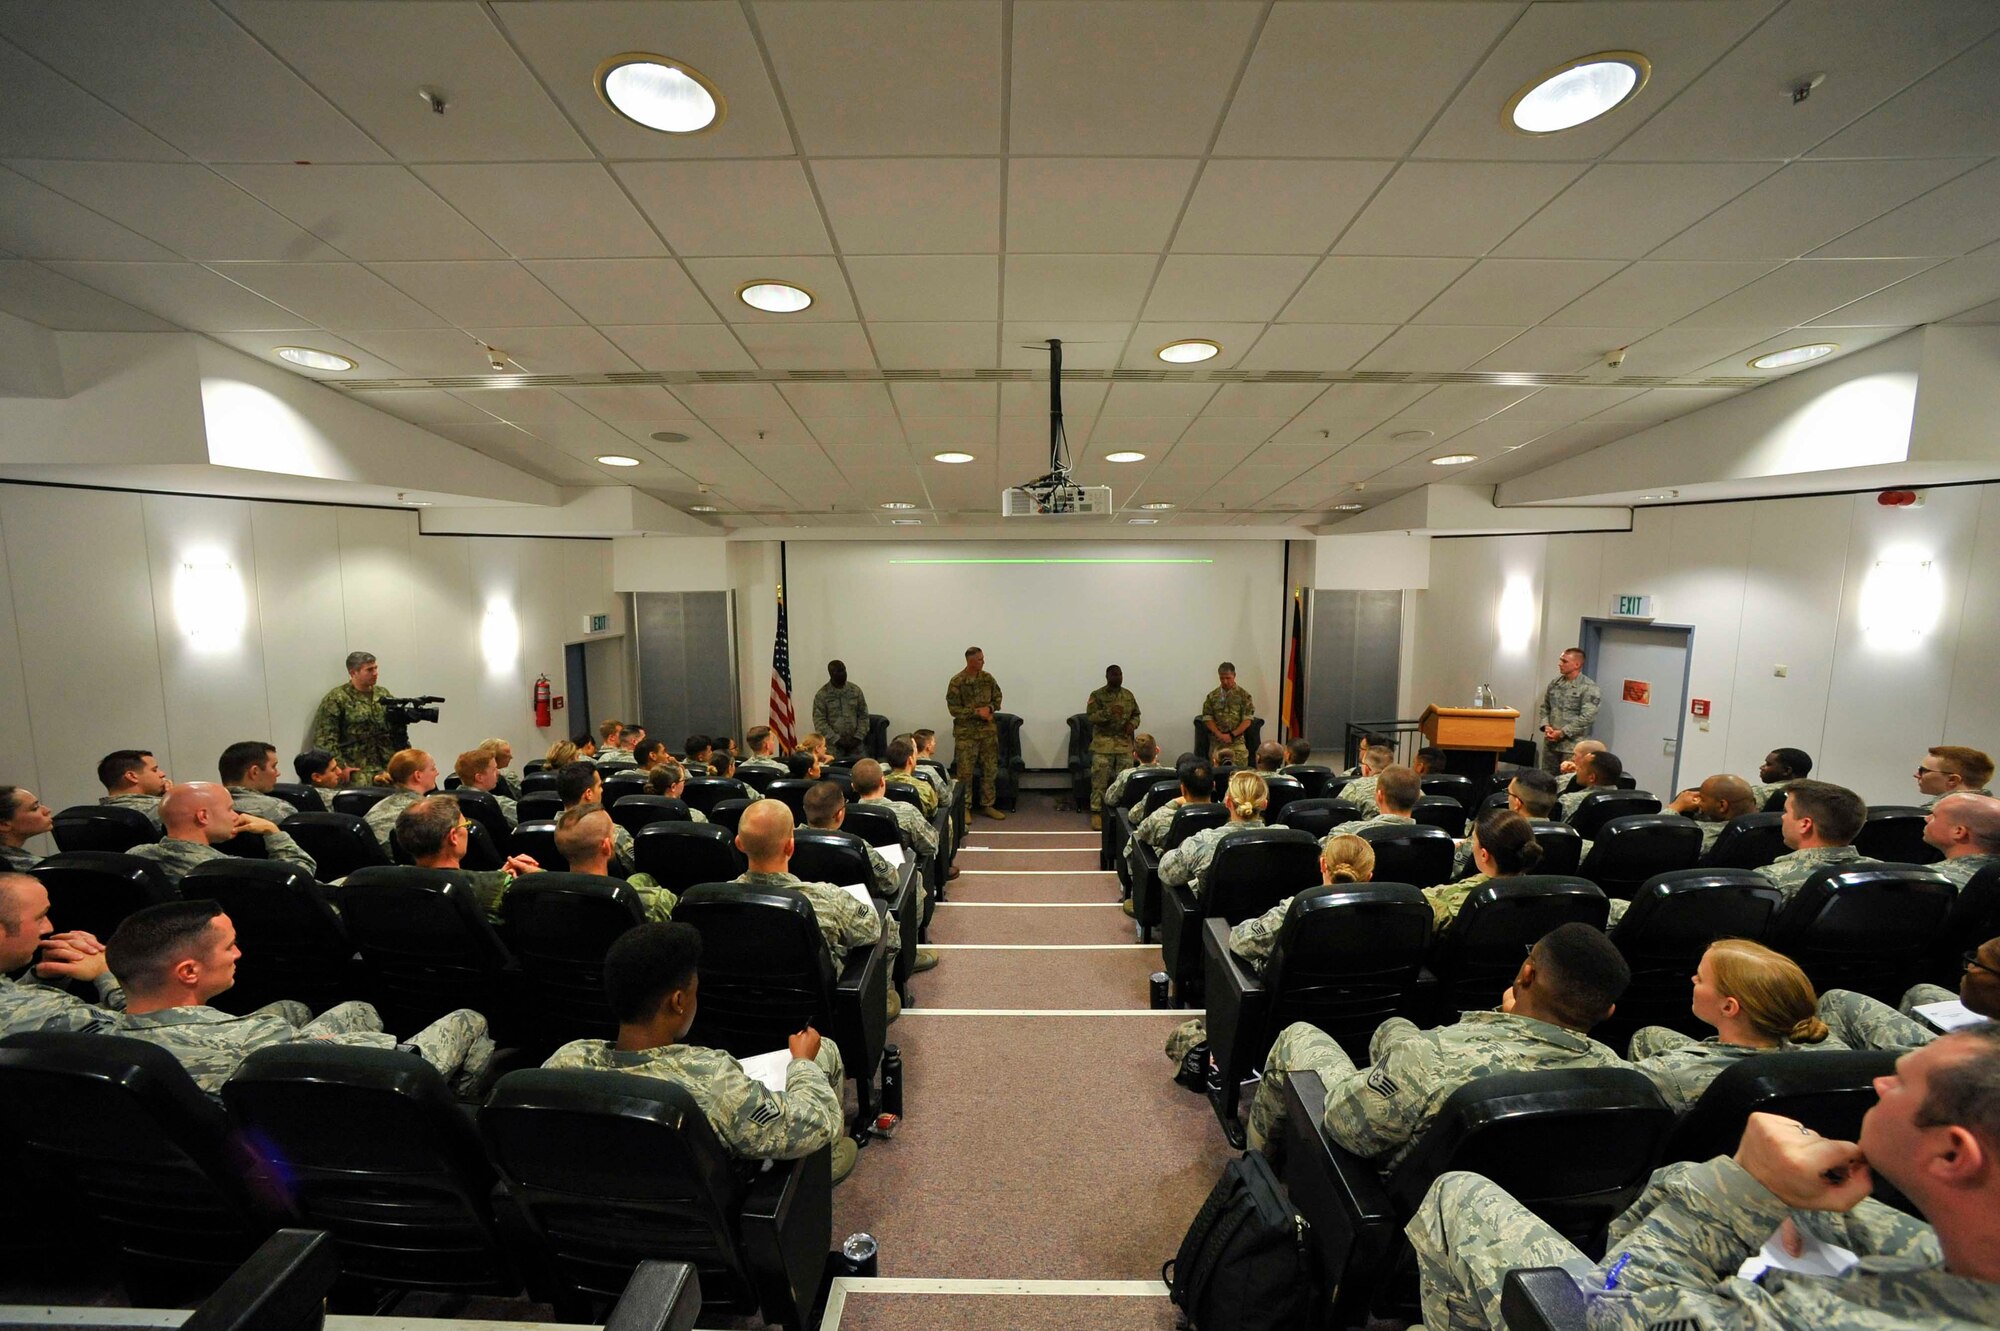 A panel of senior noncommissioned officers introduce themselves at the second annual Atlantic Stripe Conference at the U.S. Air Forces in Europe and Air Forces Africa conference room on Ramstein Air Base, Germany, May 17, 2018. Senior leaders coached, trained and mentored noncommissioned officers during the four-day conference. (U.S. Air Force photo by Airman 1st Class D. Blake Browning)